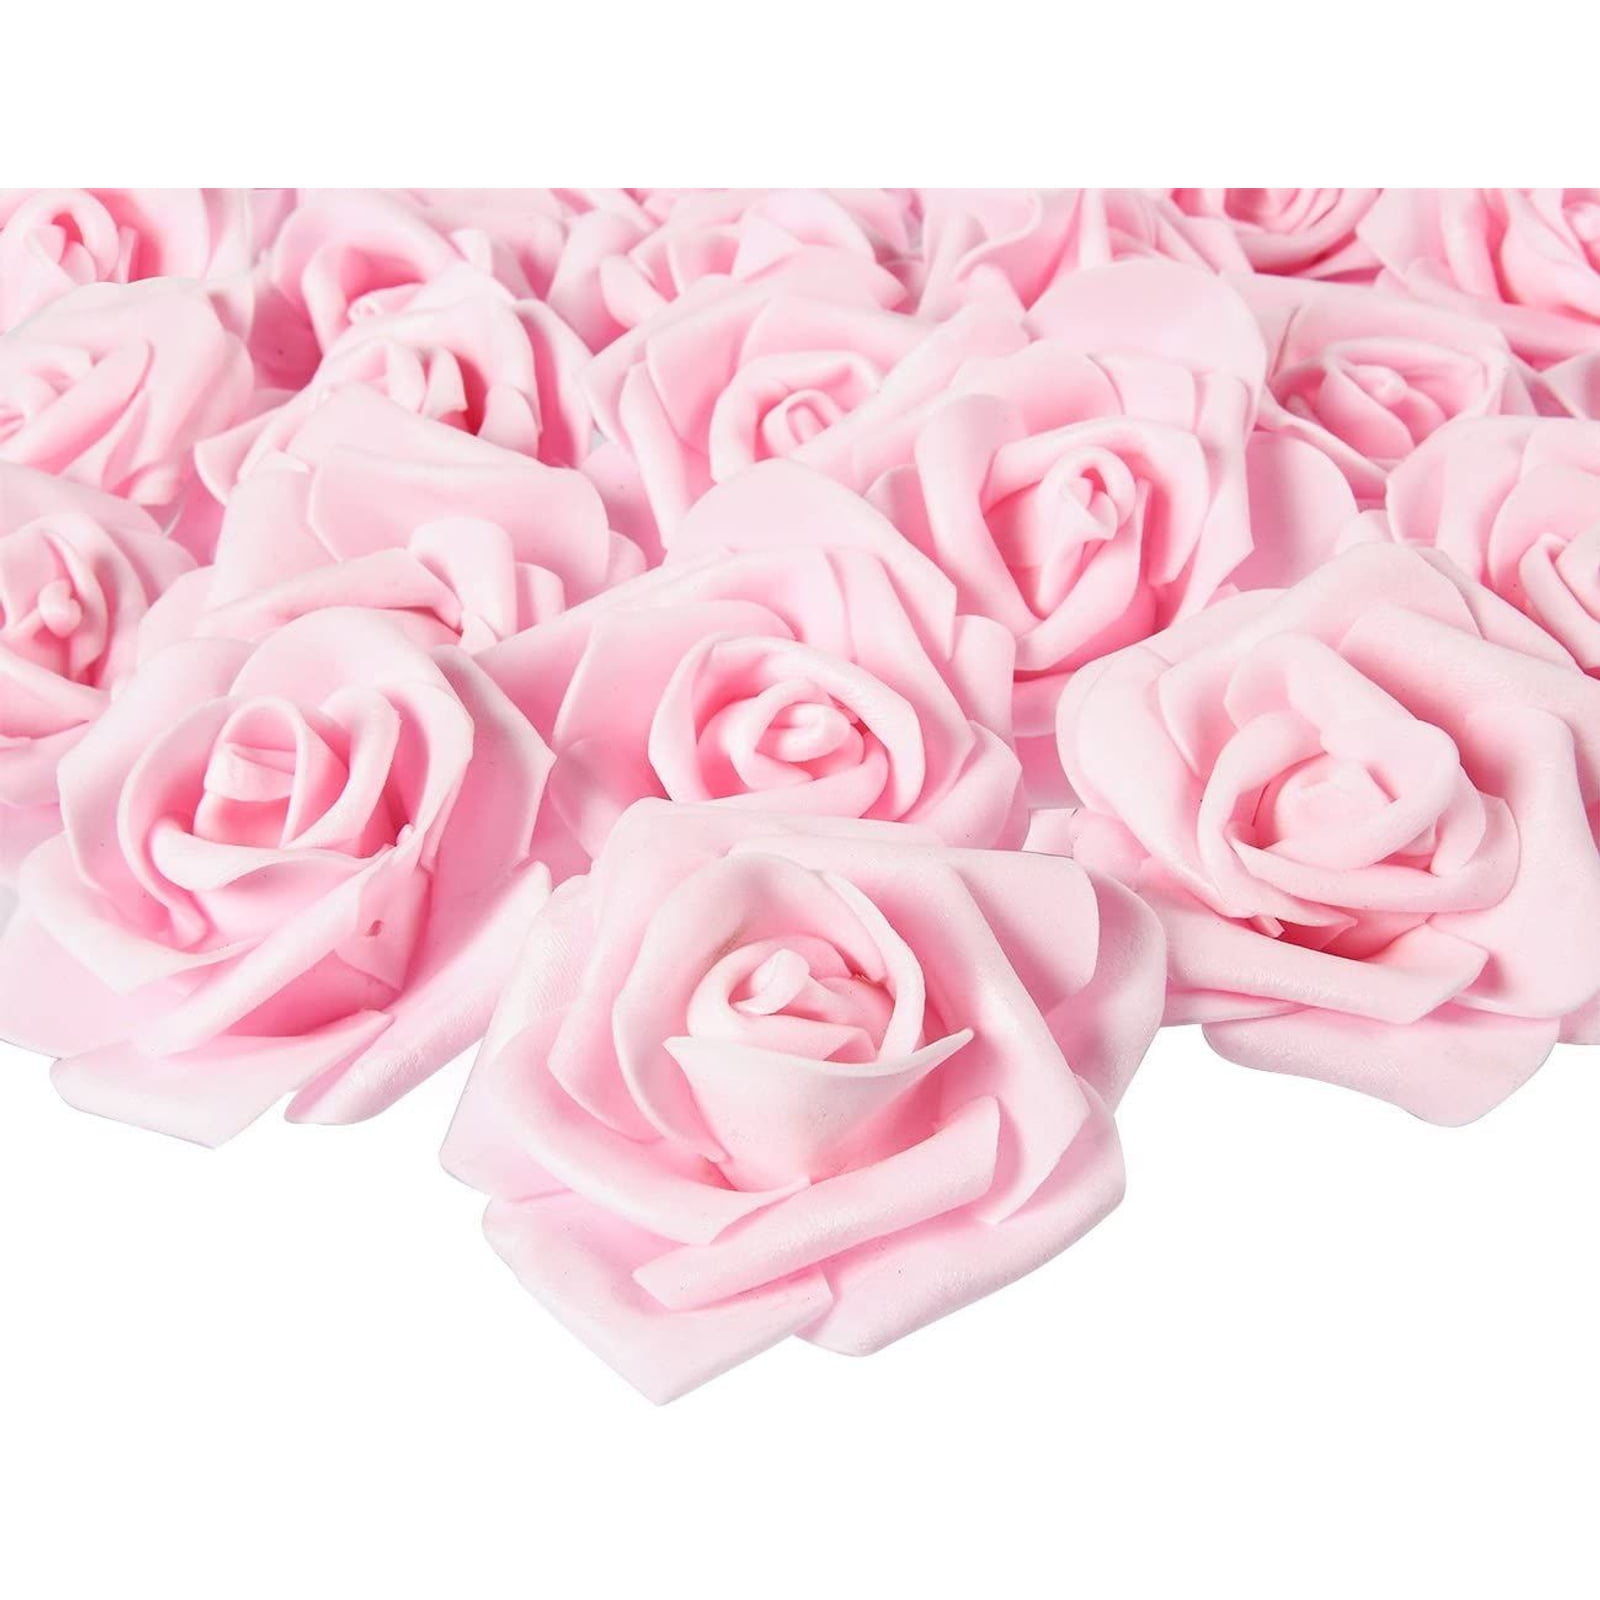 Crafts 100-Pack Artificial Roses Juvale Rose Flower Heads Deep Pink 3 x 1.25 x 3 inches Perfect Wedding Decorations Baby Showers